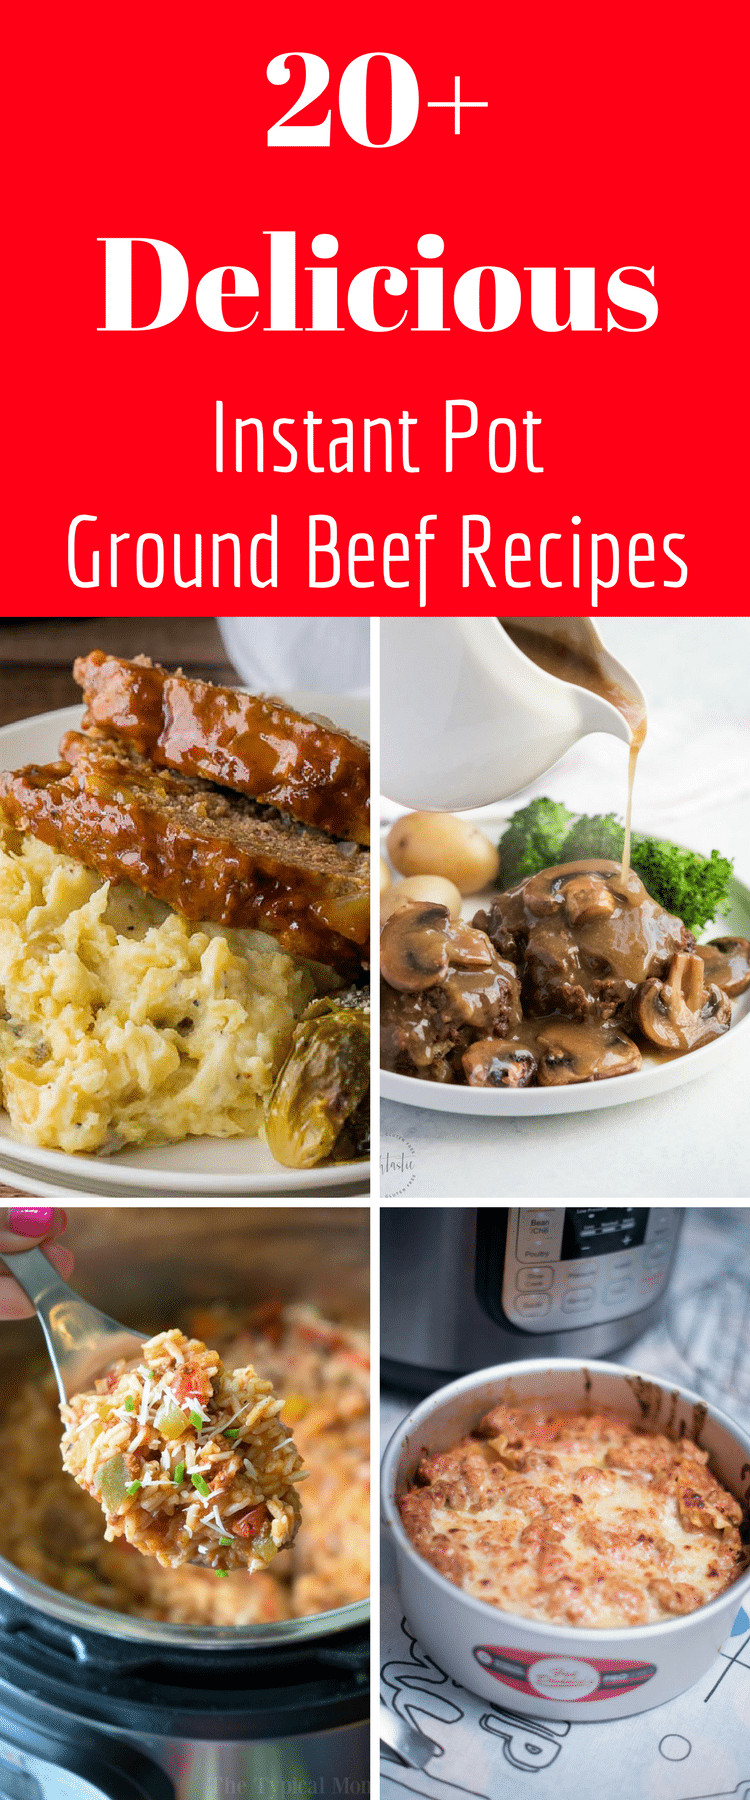 Instant Pot Recipes Ground Beef
 20 of the BEST Instant Pot Ground Beef Recipes